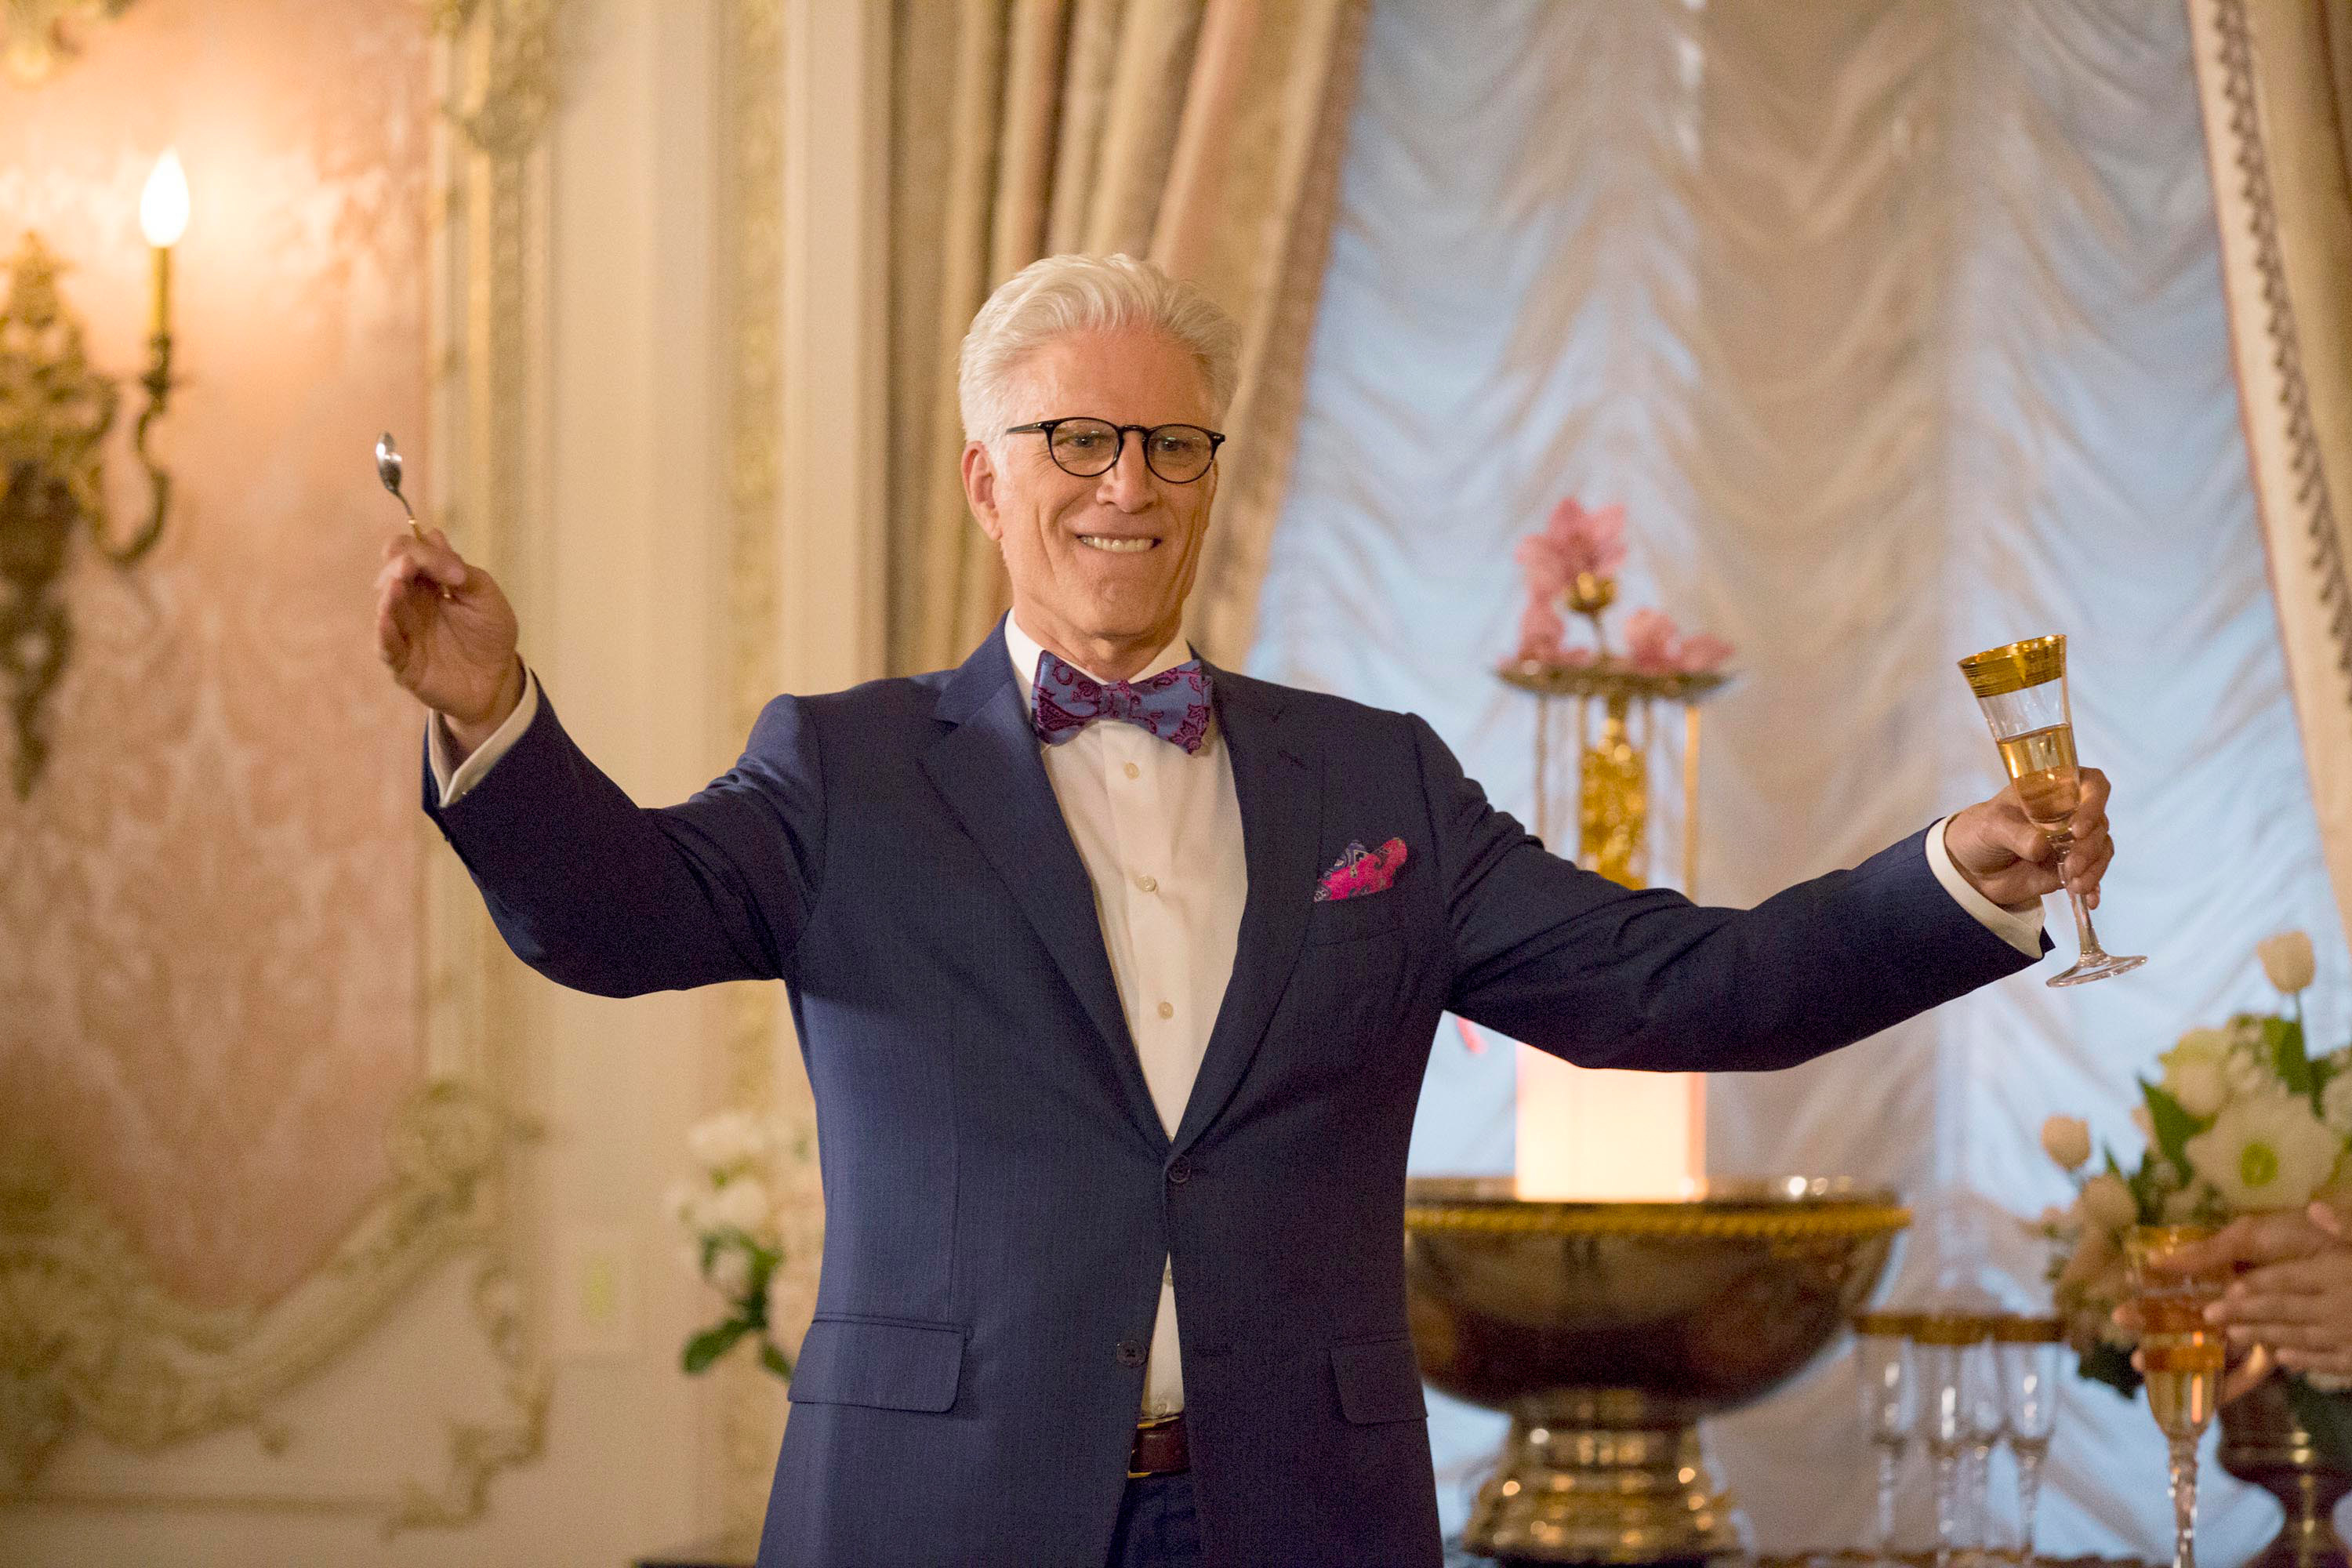 Ted Danson as Michael leading a toast